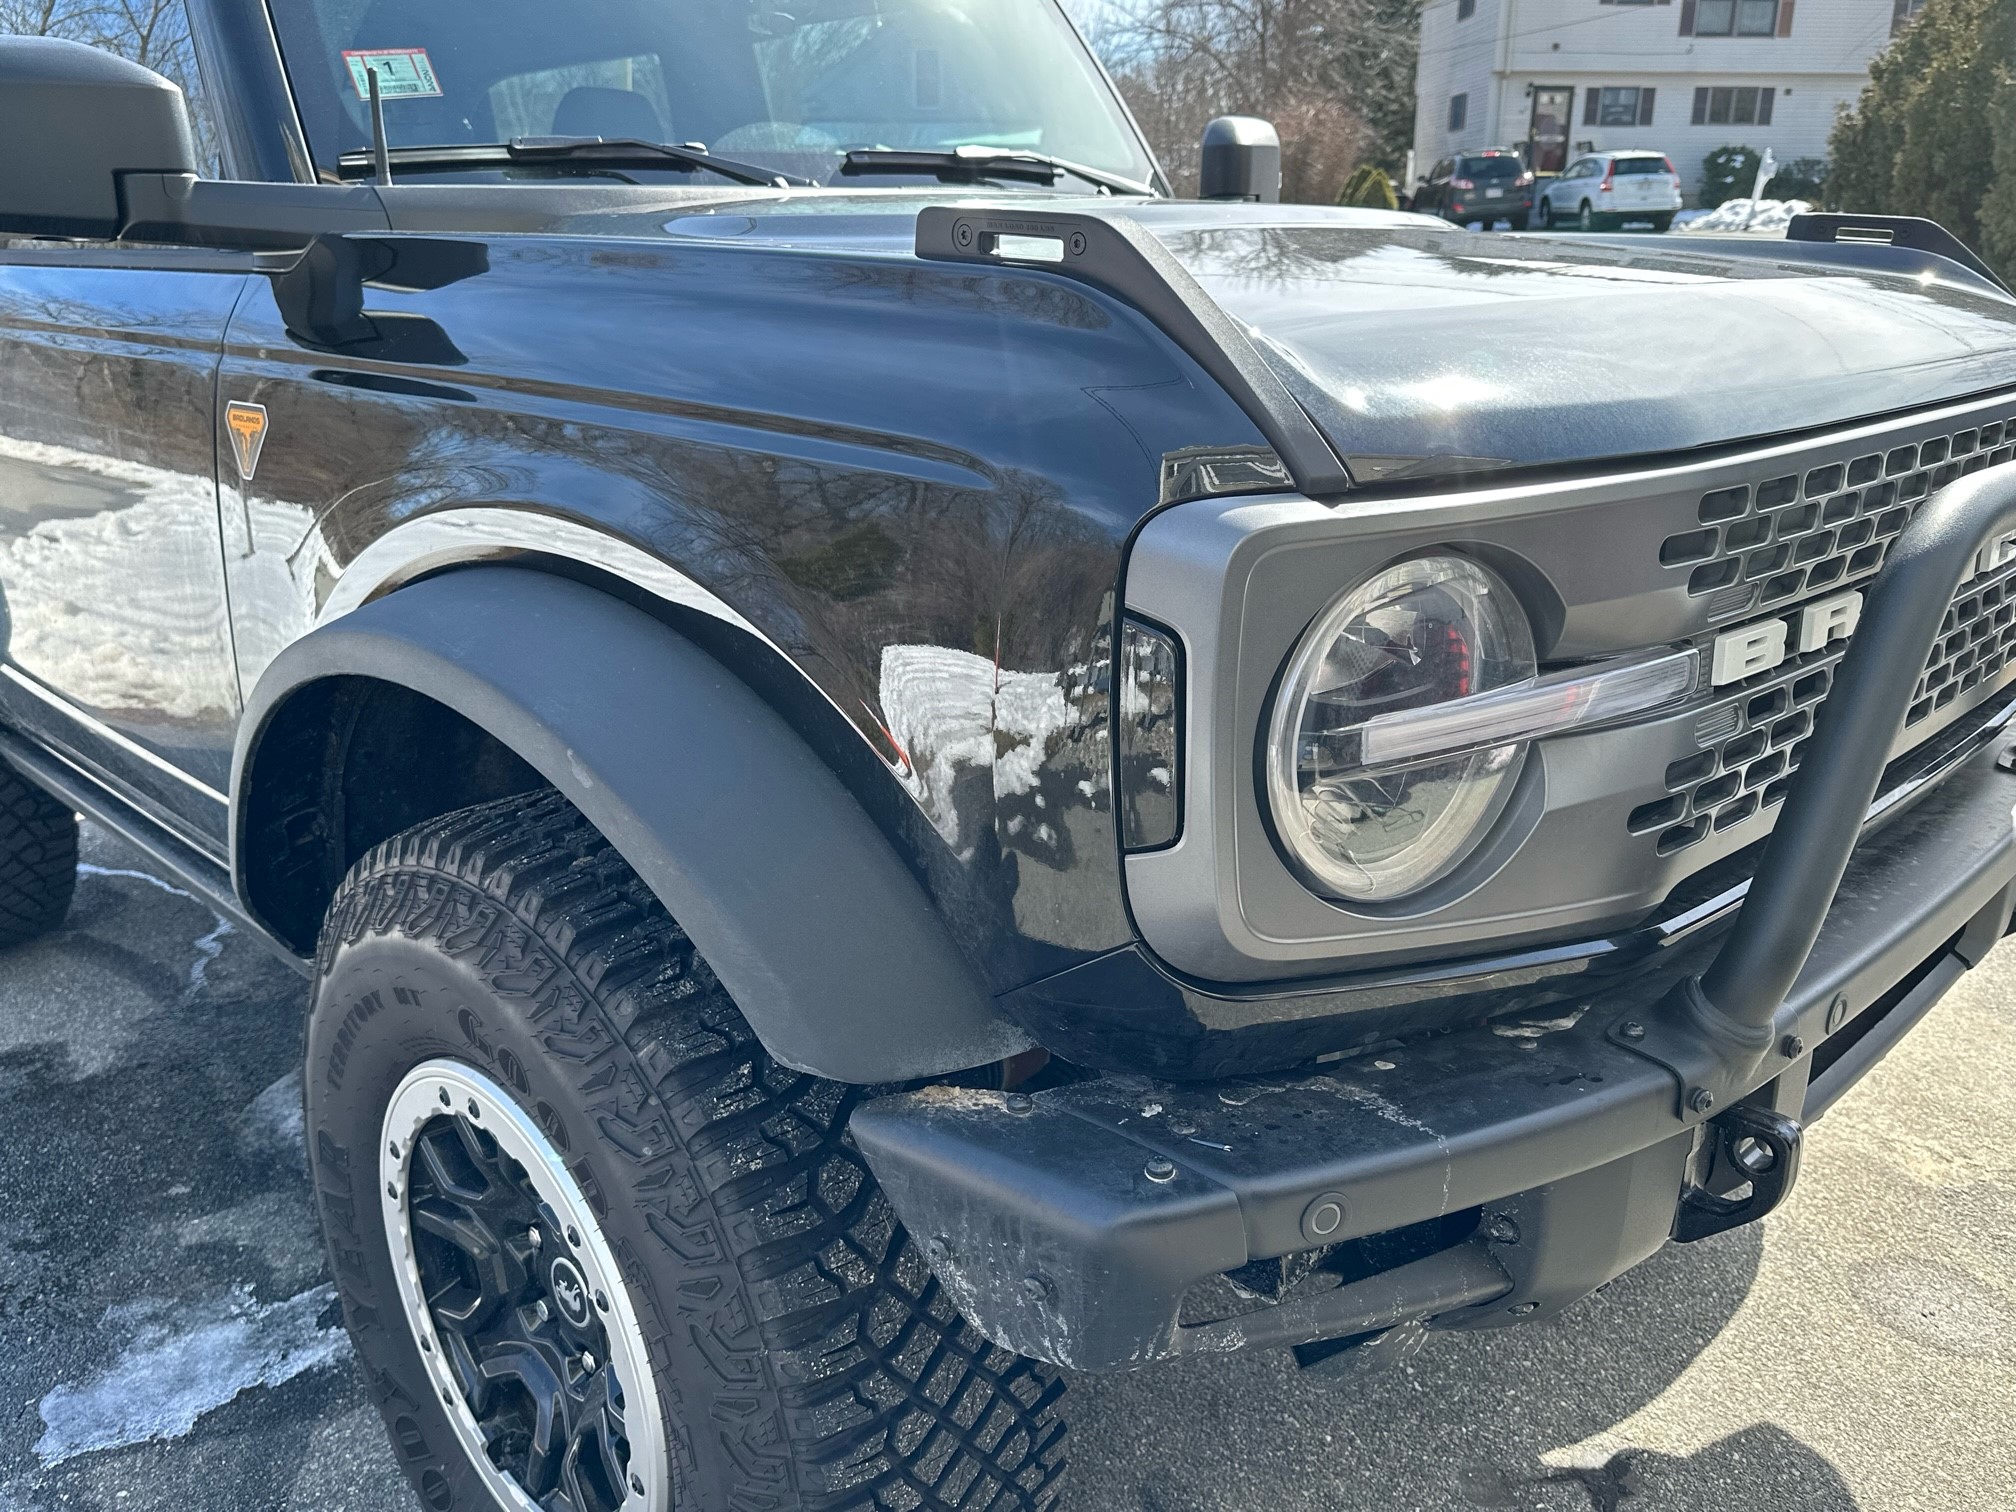 Ford Bronco Put any cool / unique vinyl decals on your Bronco?  Let's see them! tint